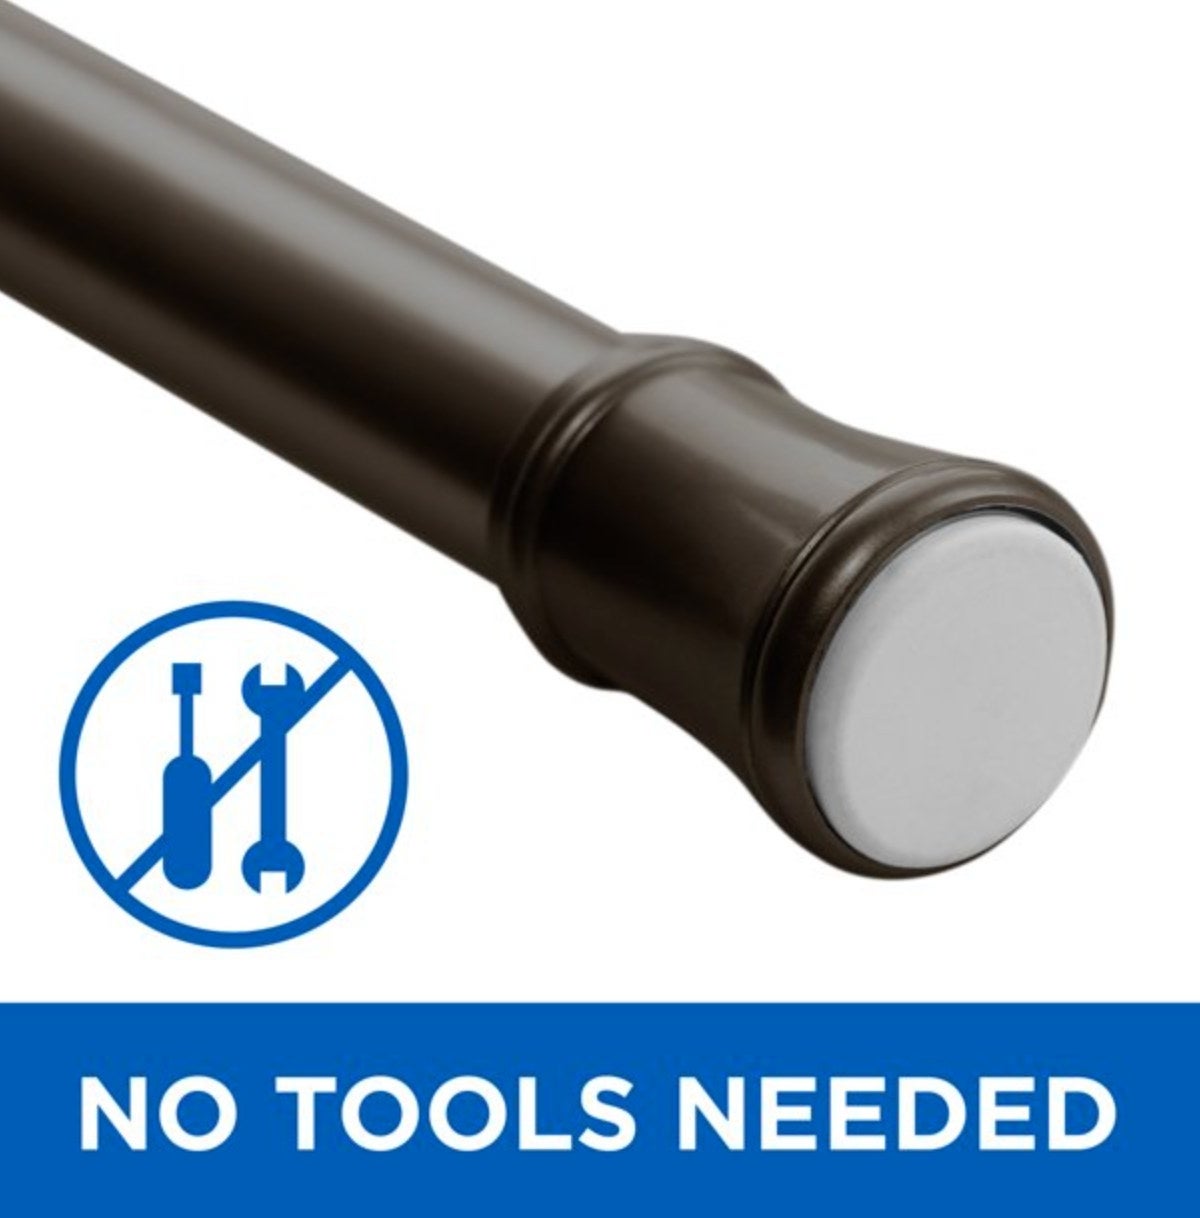 a graphic showing the end of the curtain rod and the text &quot;NO TOOLS NEEDED&quot;